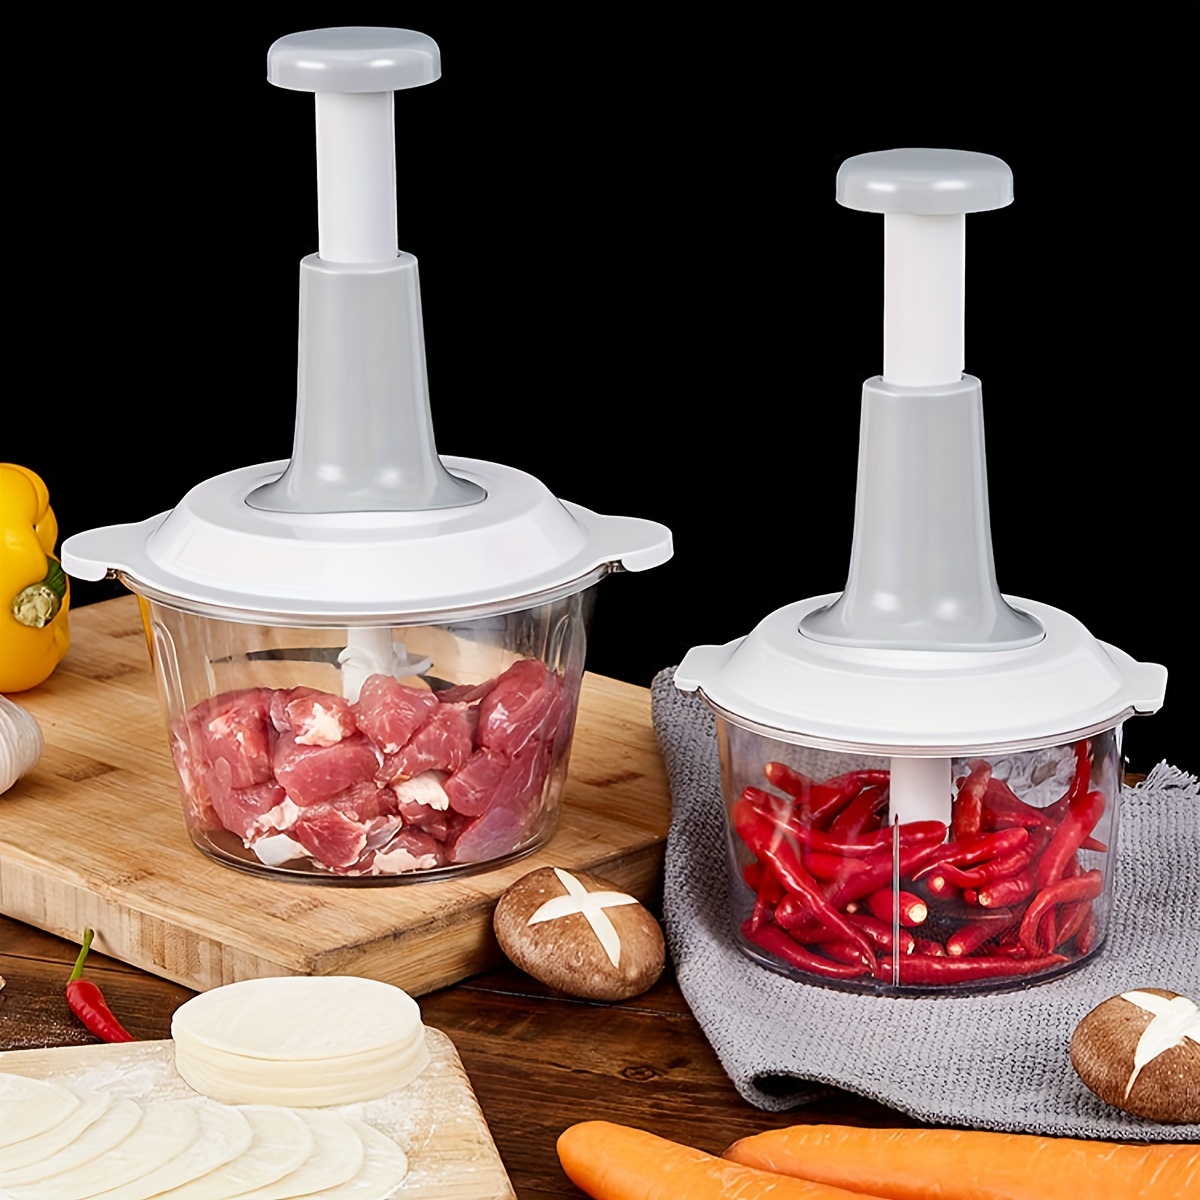 

Versatile 1.5l Manual Food Processor - Stainless Steel Vegetable Crusher, Garlic Masher & Meat Grinder - Easy Clean, Perfect For Home Kitchens & Outdoor Camping